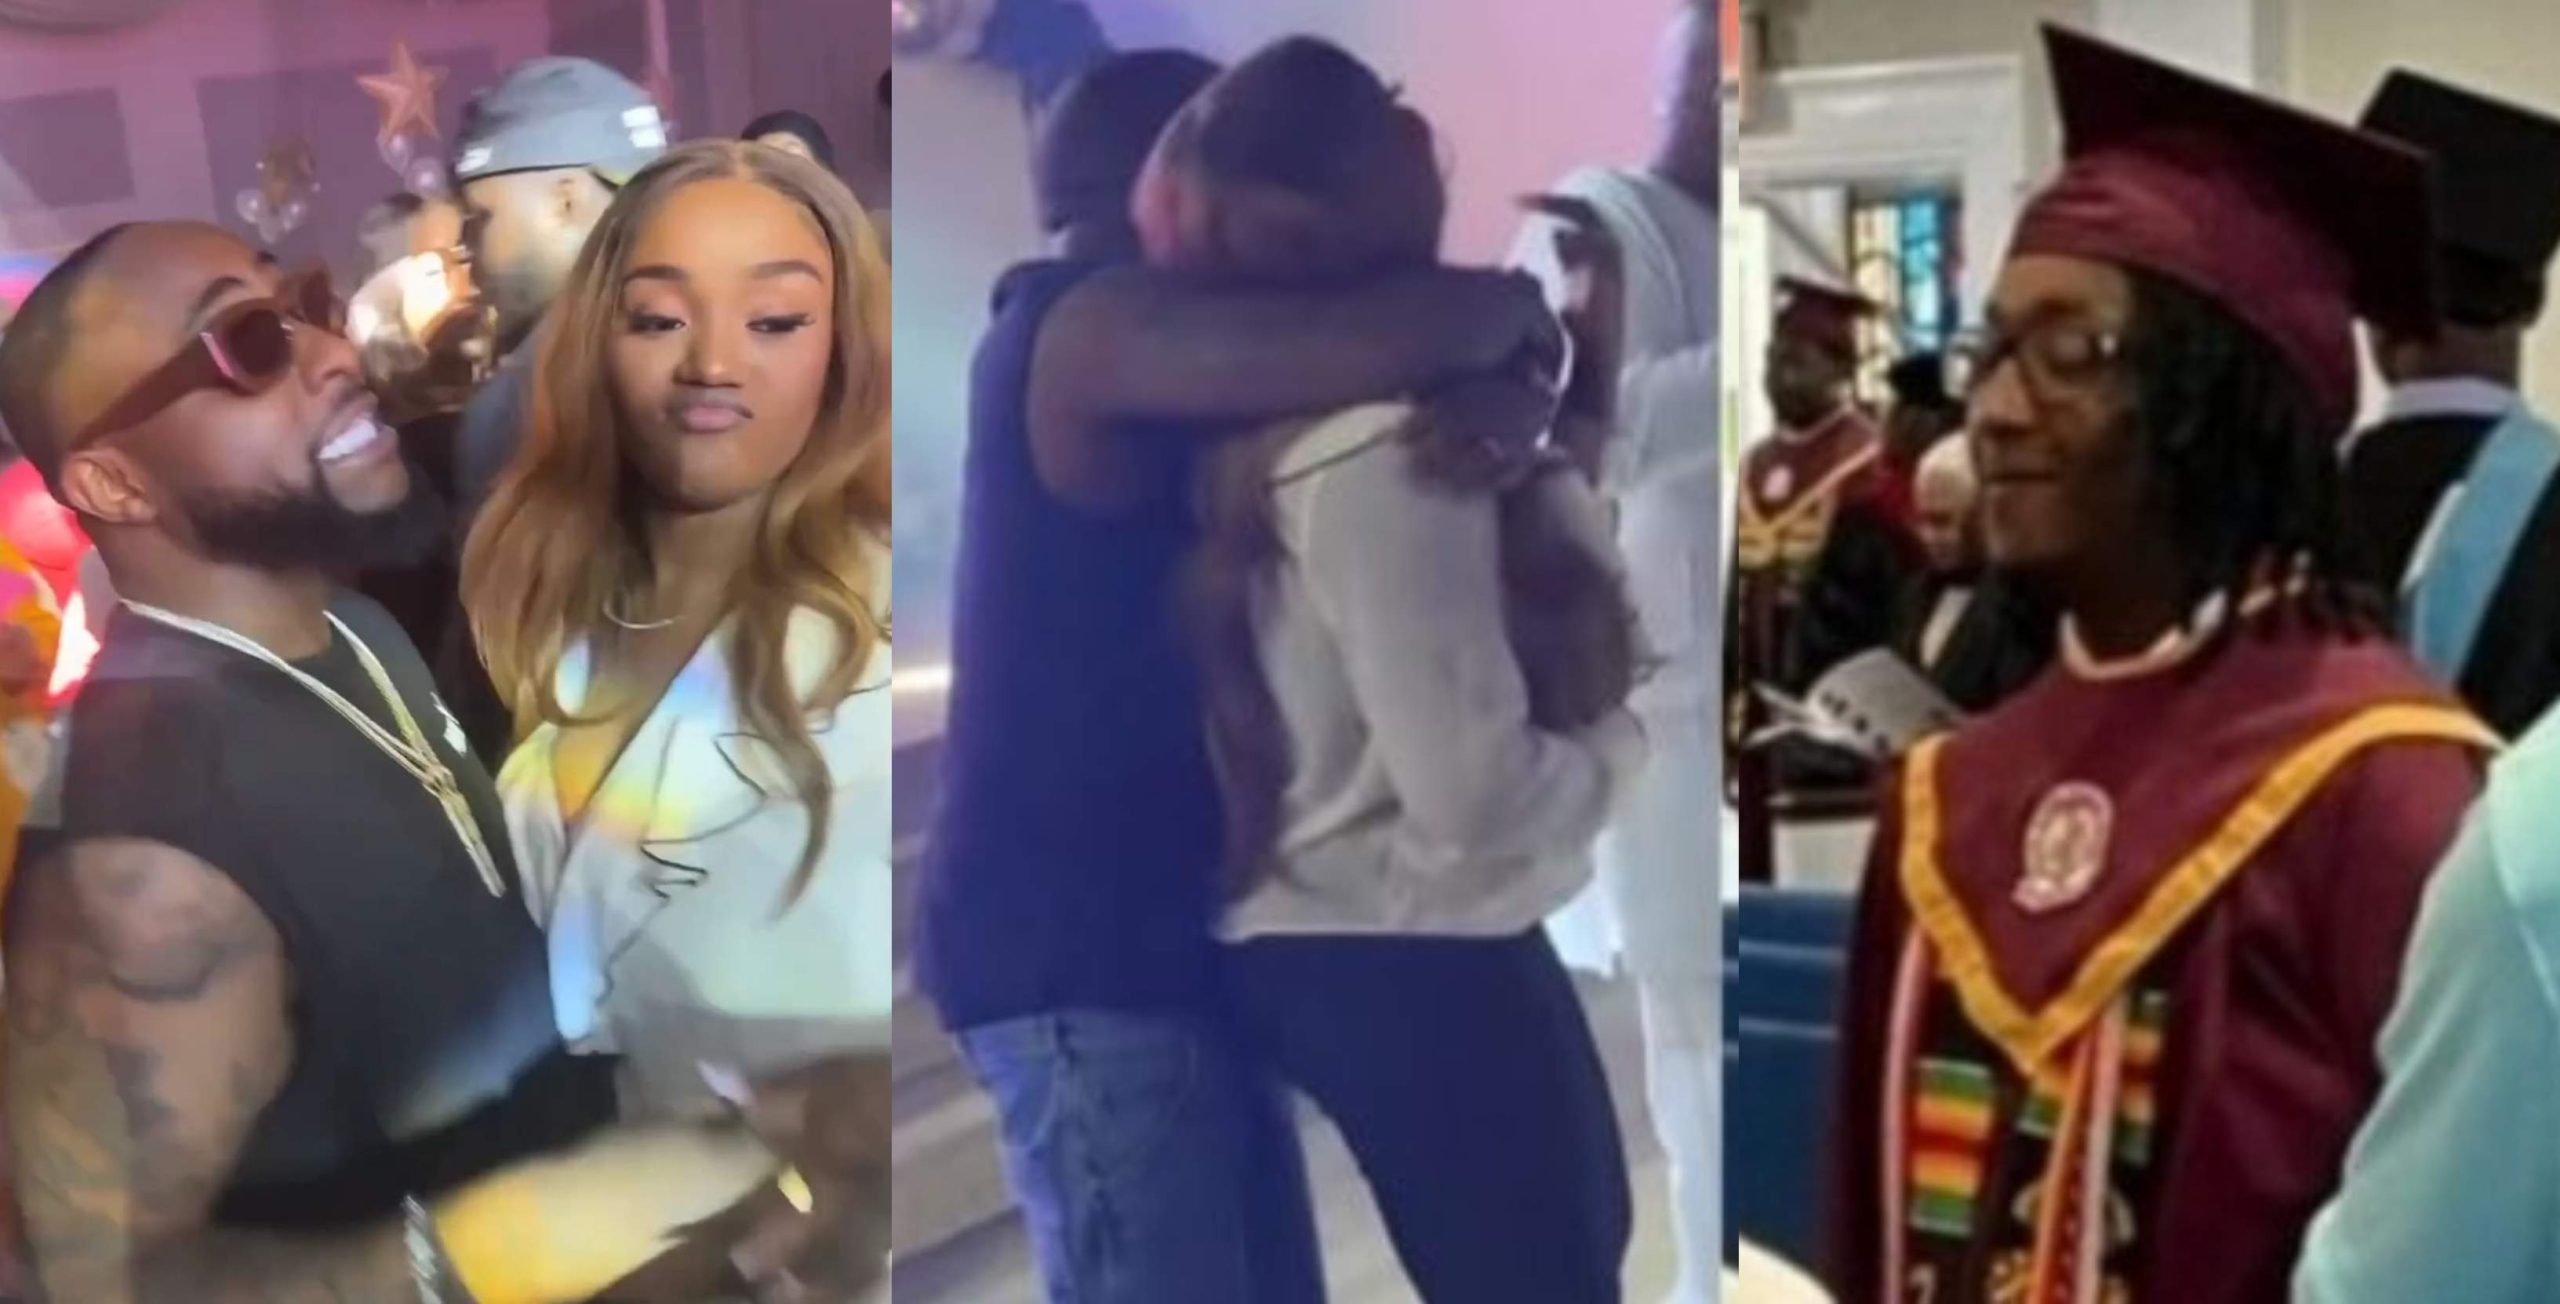 Davido shares loved-up moment with his wife Chioma Adeleke at his nephew’s graduation party